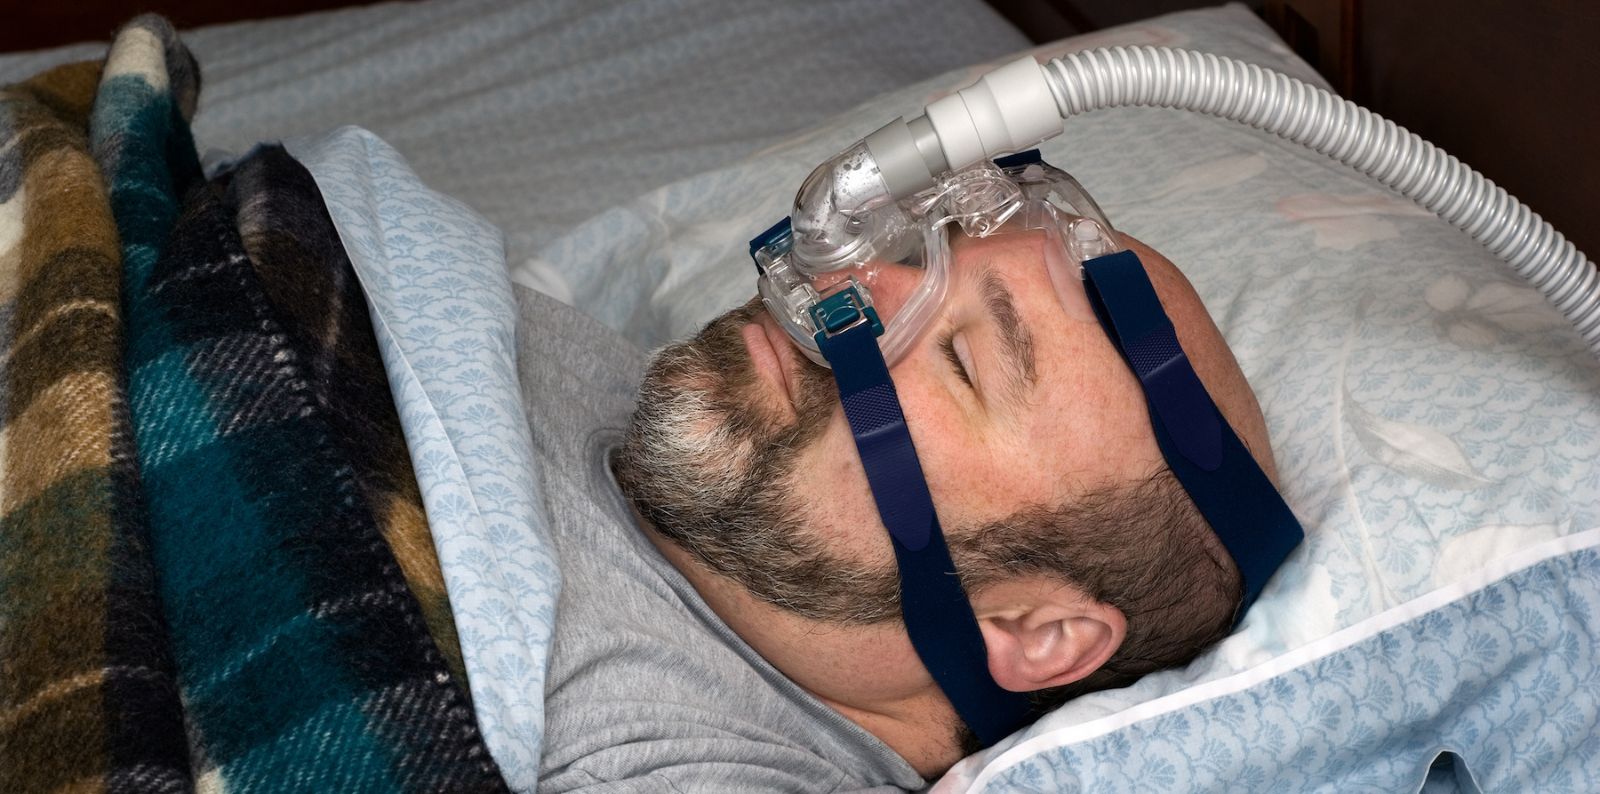 Philips CPAP Lawsuit: Harmed Veterans May Be Entitled To Compensation